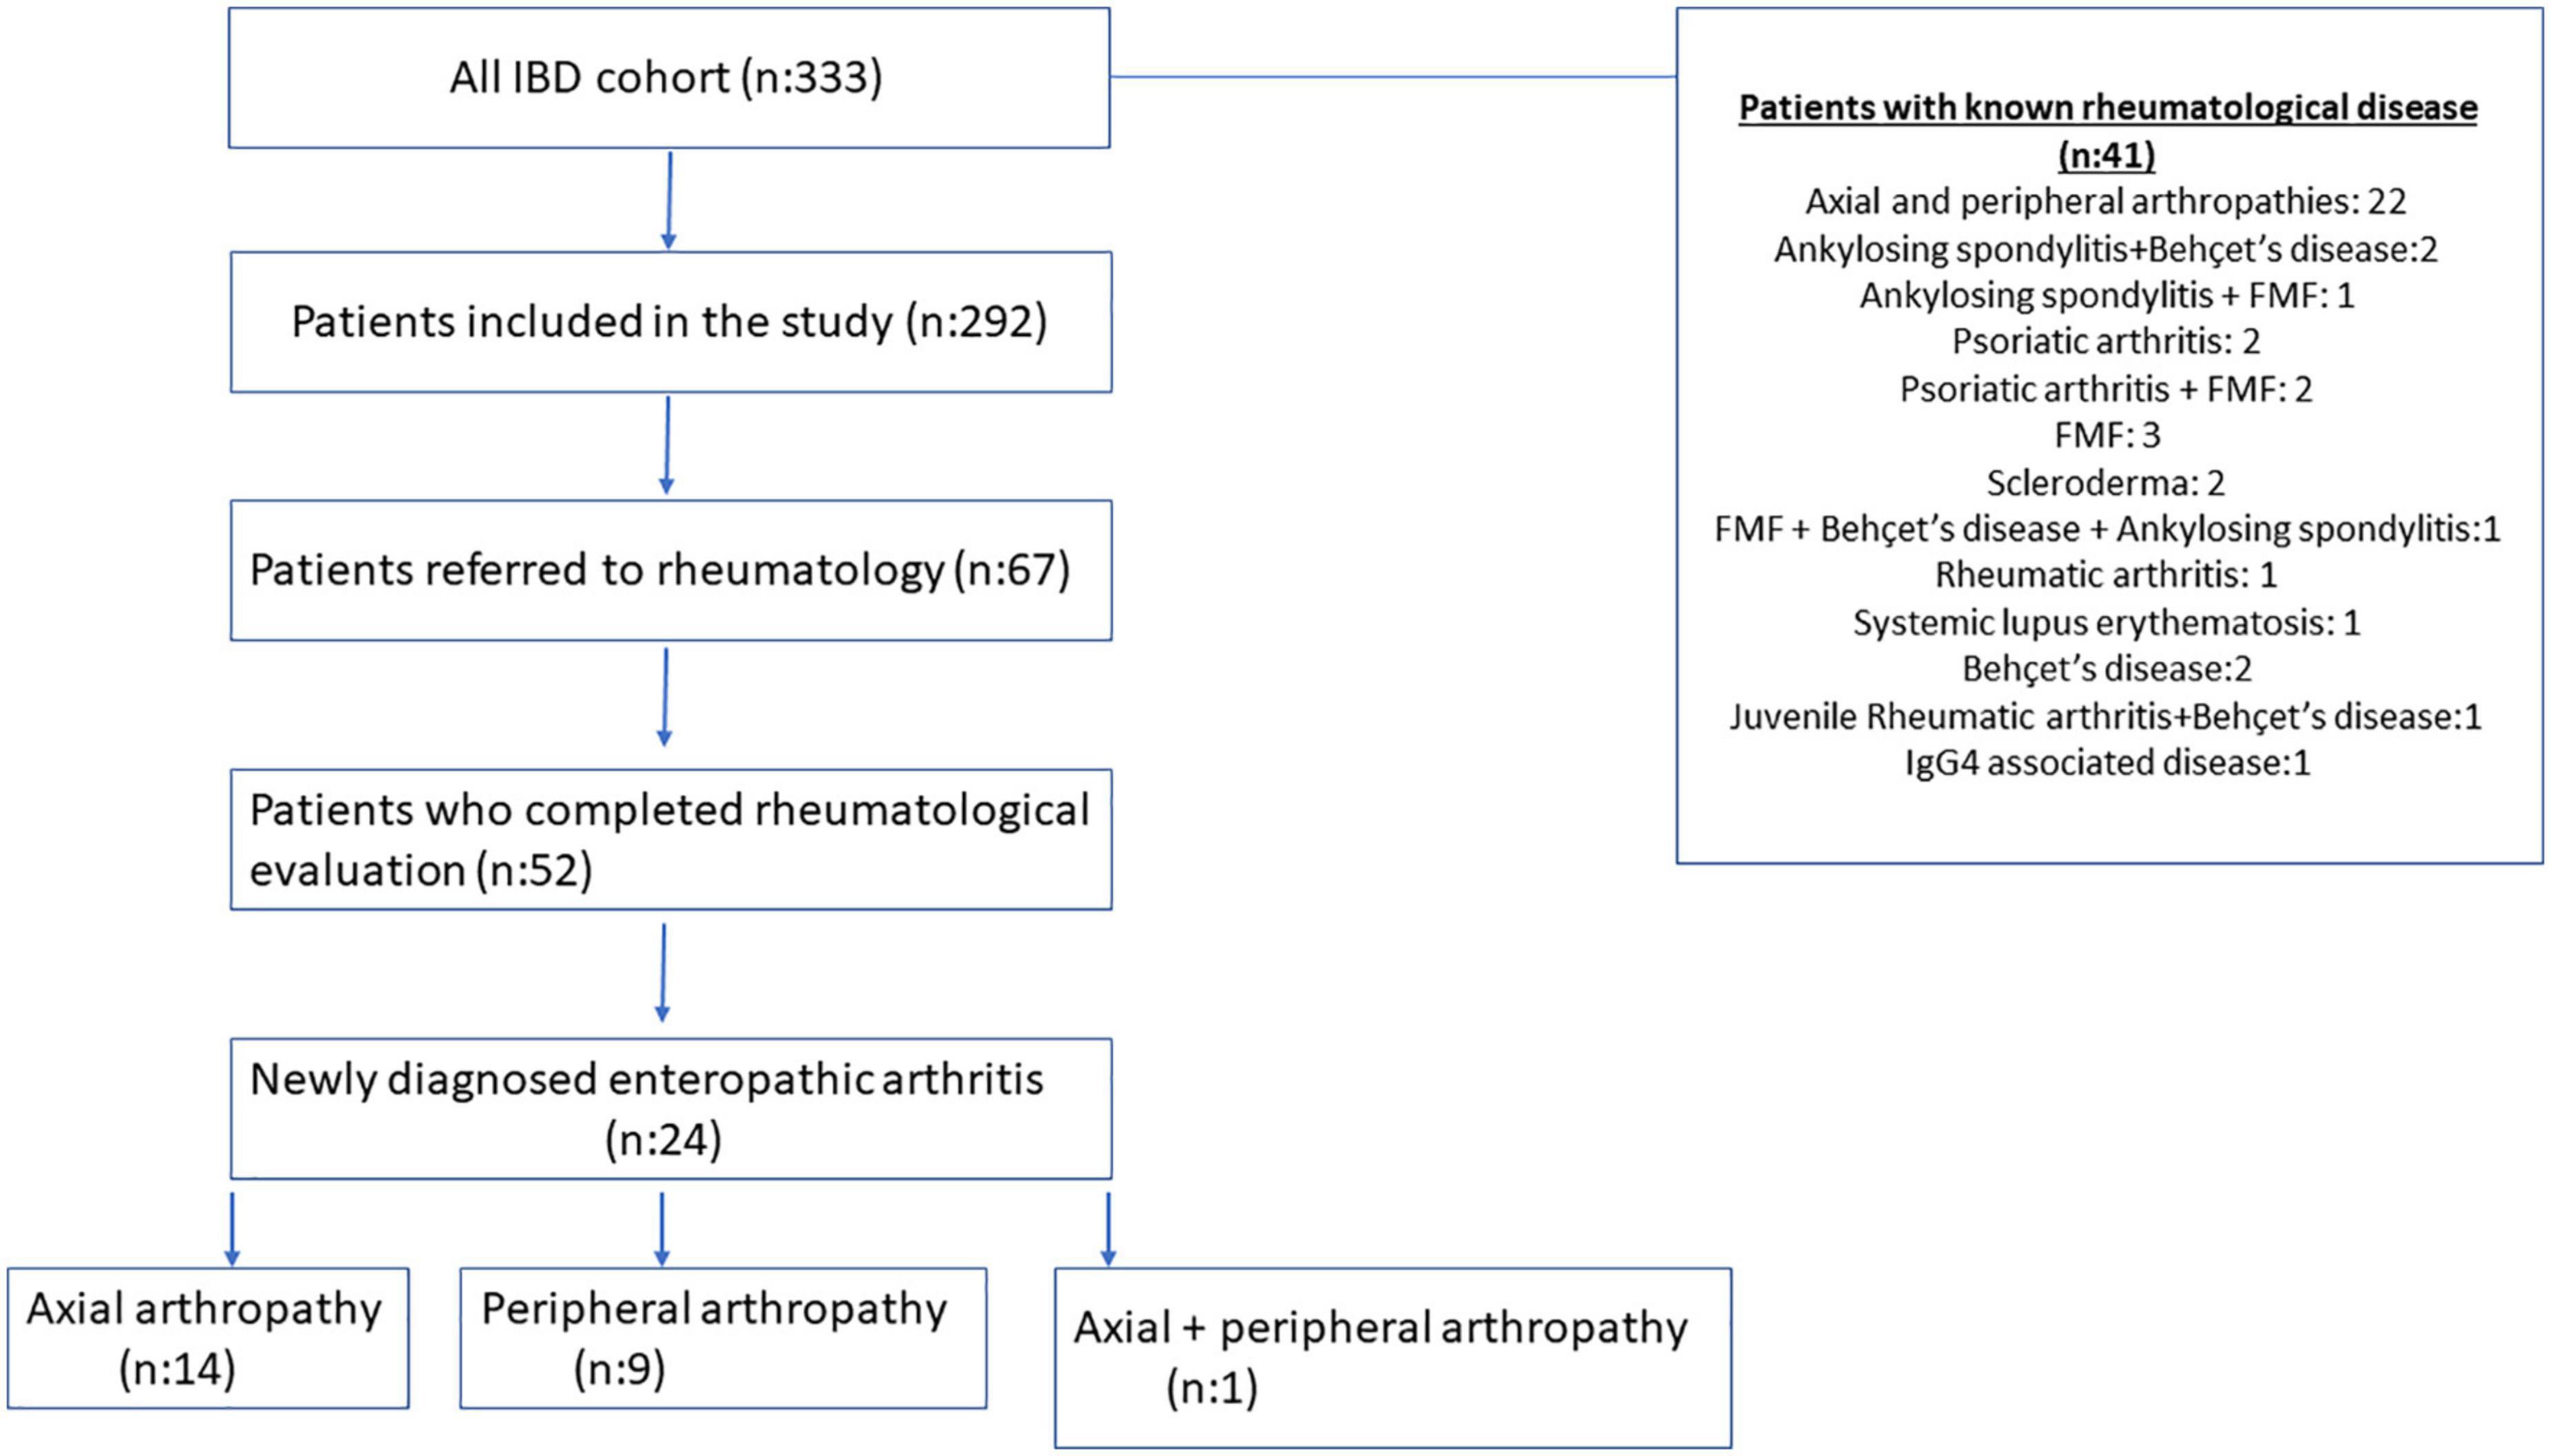 The DETAIL questionnaire is a useful and effective tool to assess spondyloarthritis in patients with inflammatory bowel disease